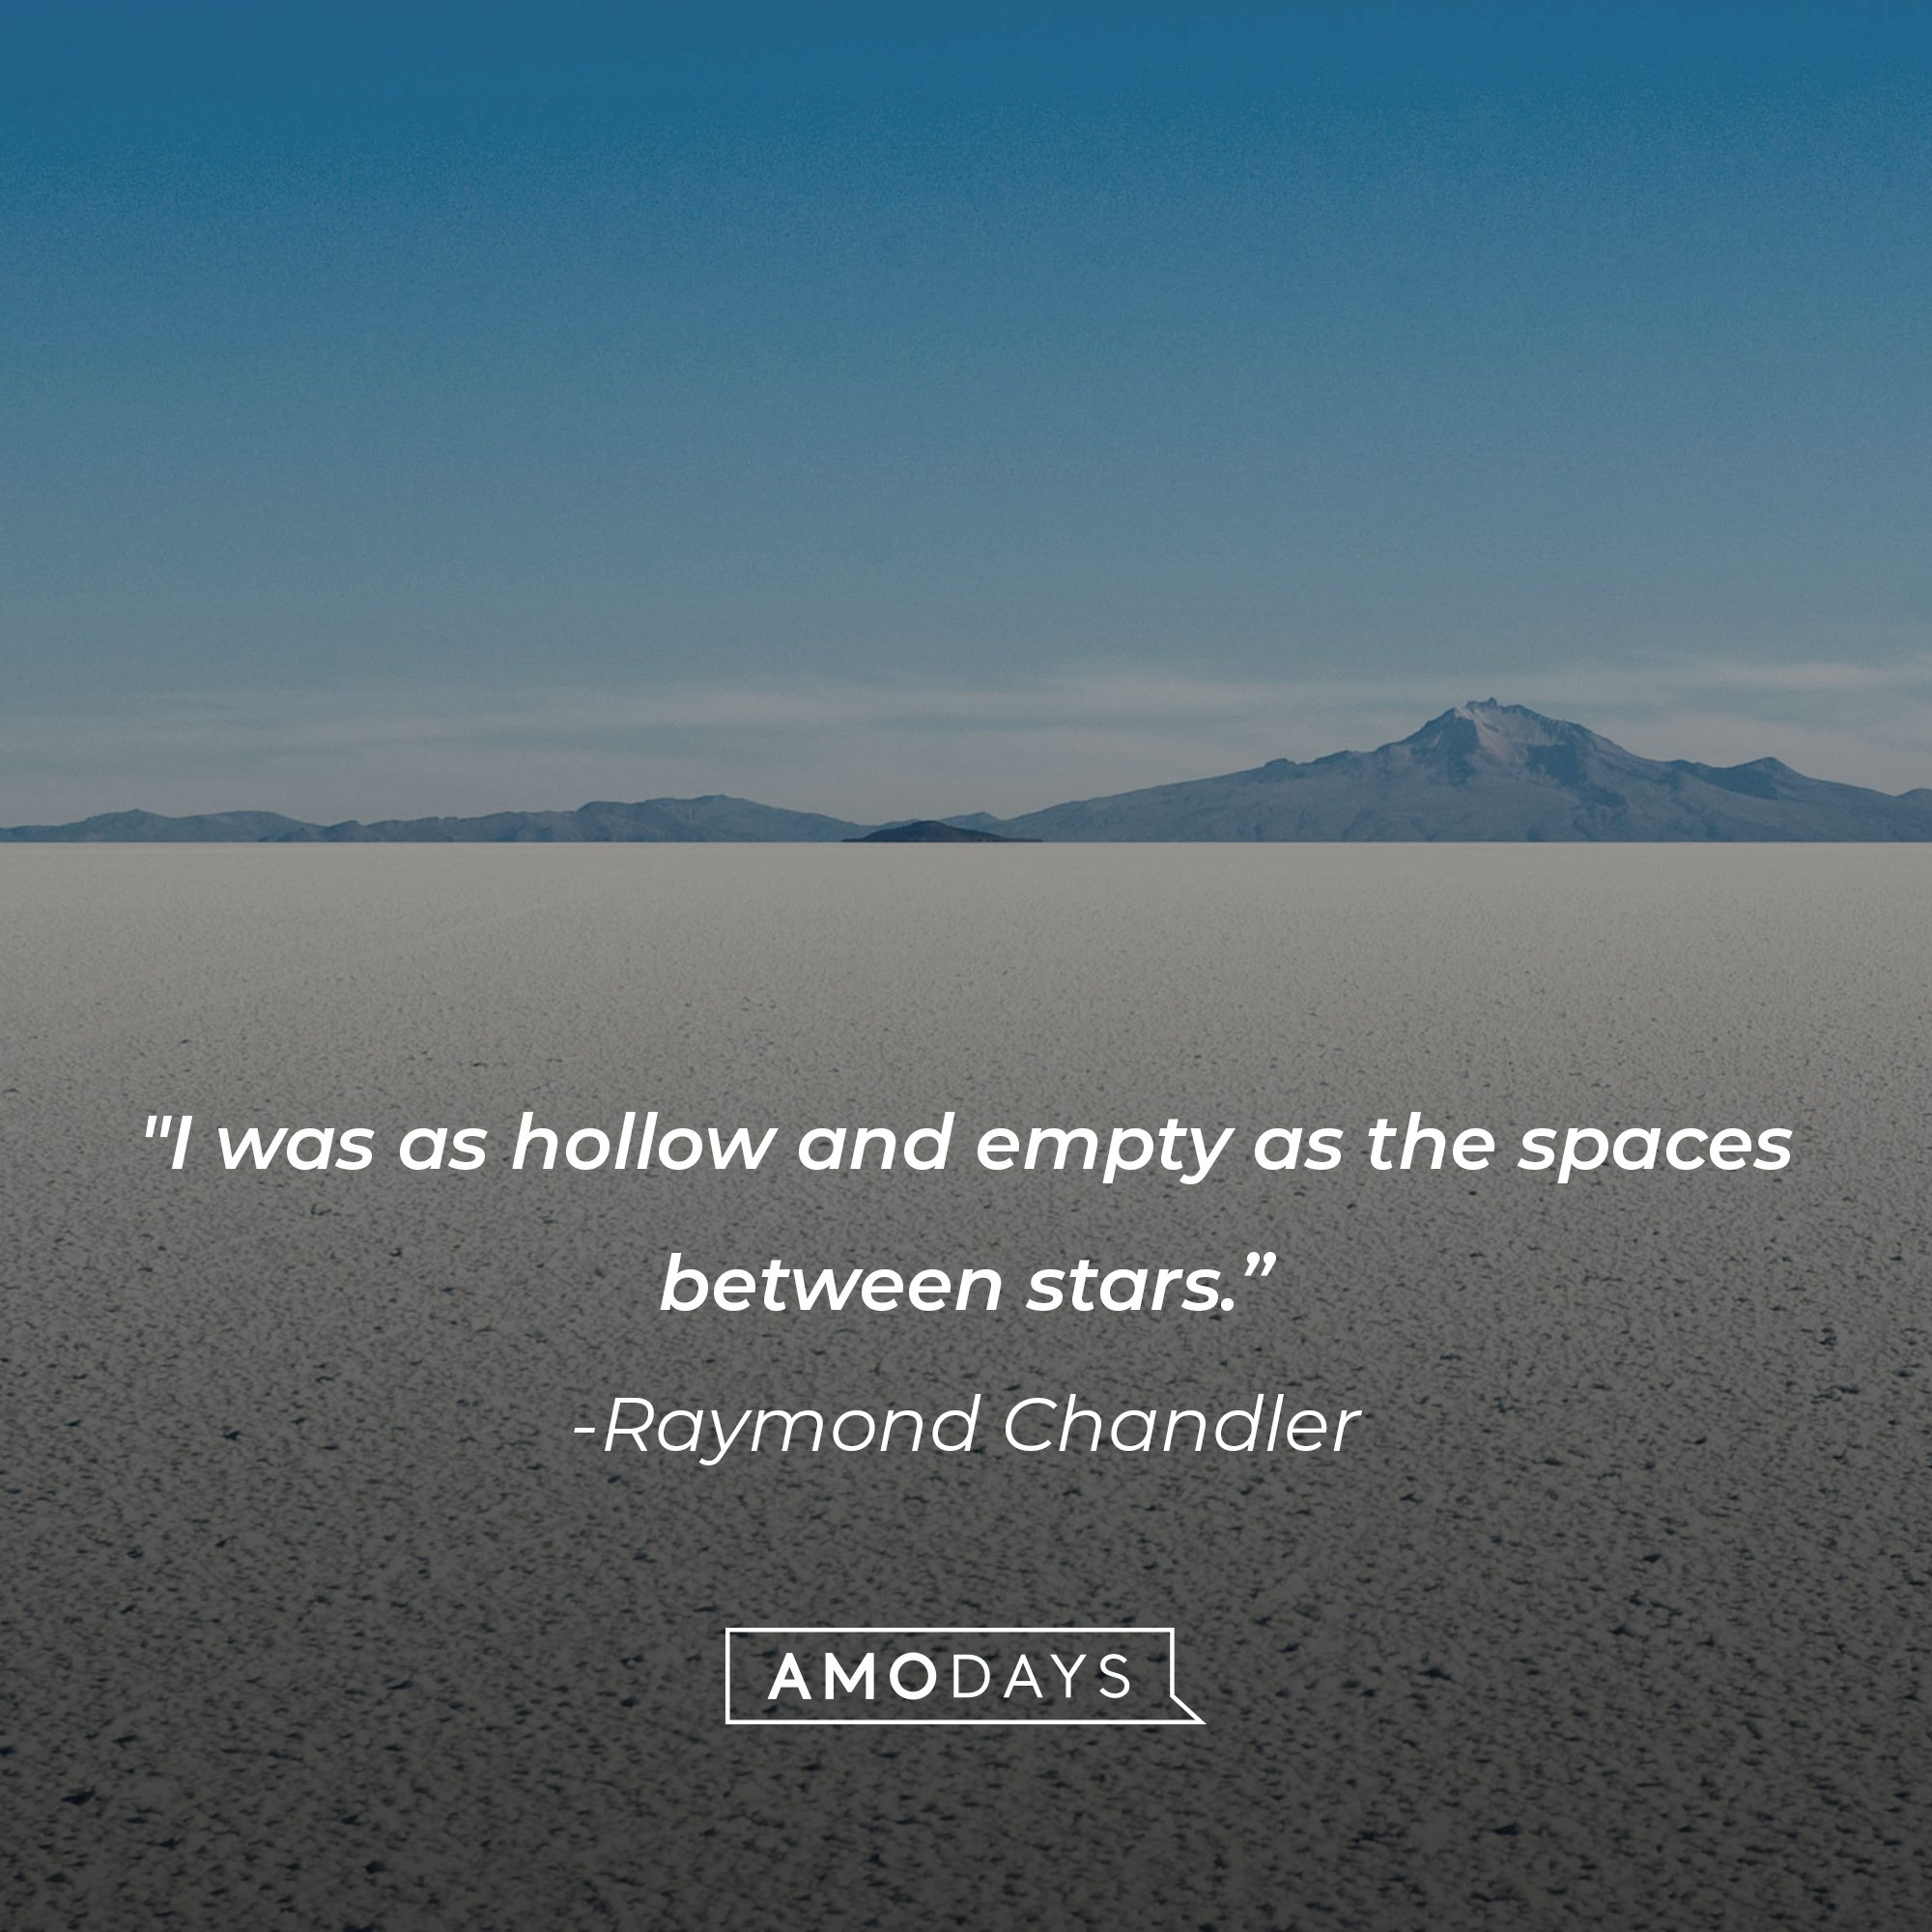 Raymond Chandler’s quote: "I was as hollow and empty as the spaces between stars.” | Image: AmoDays 